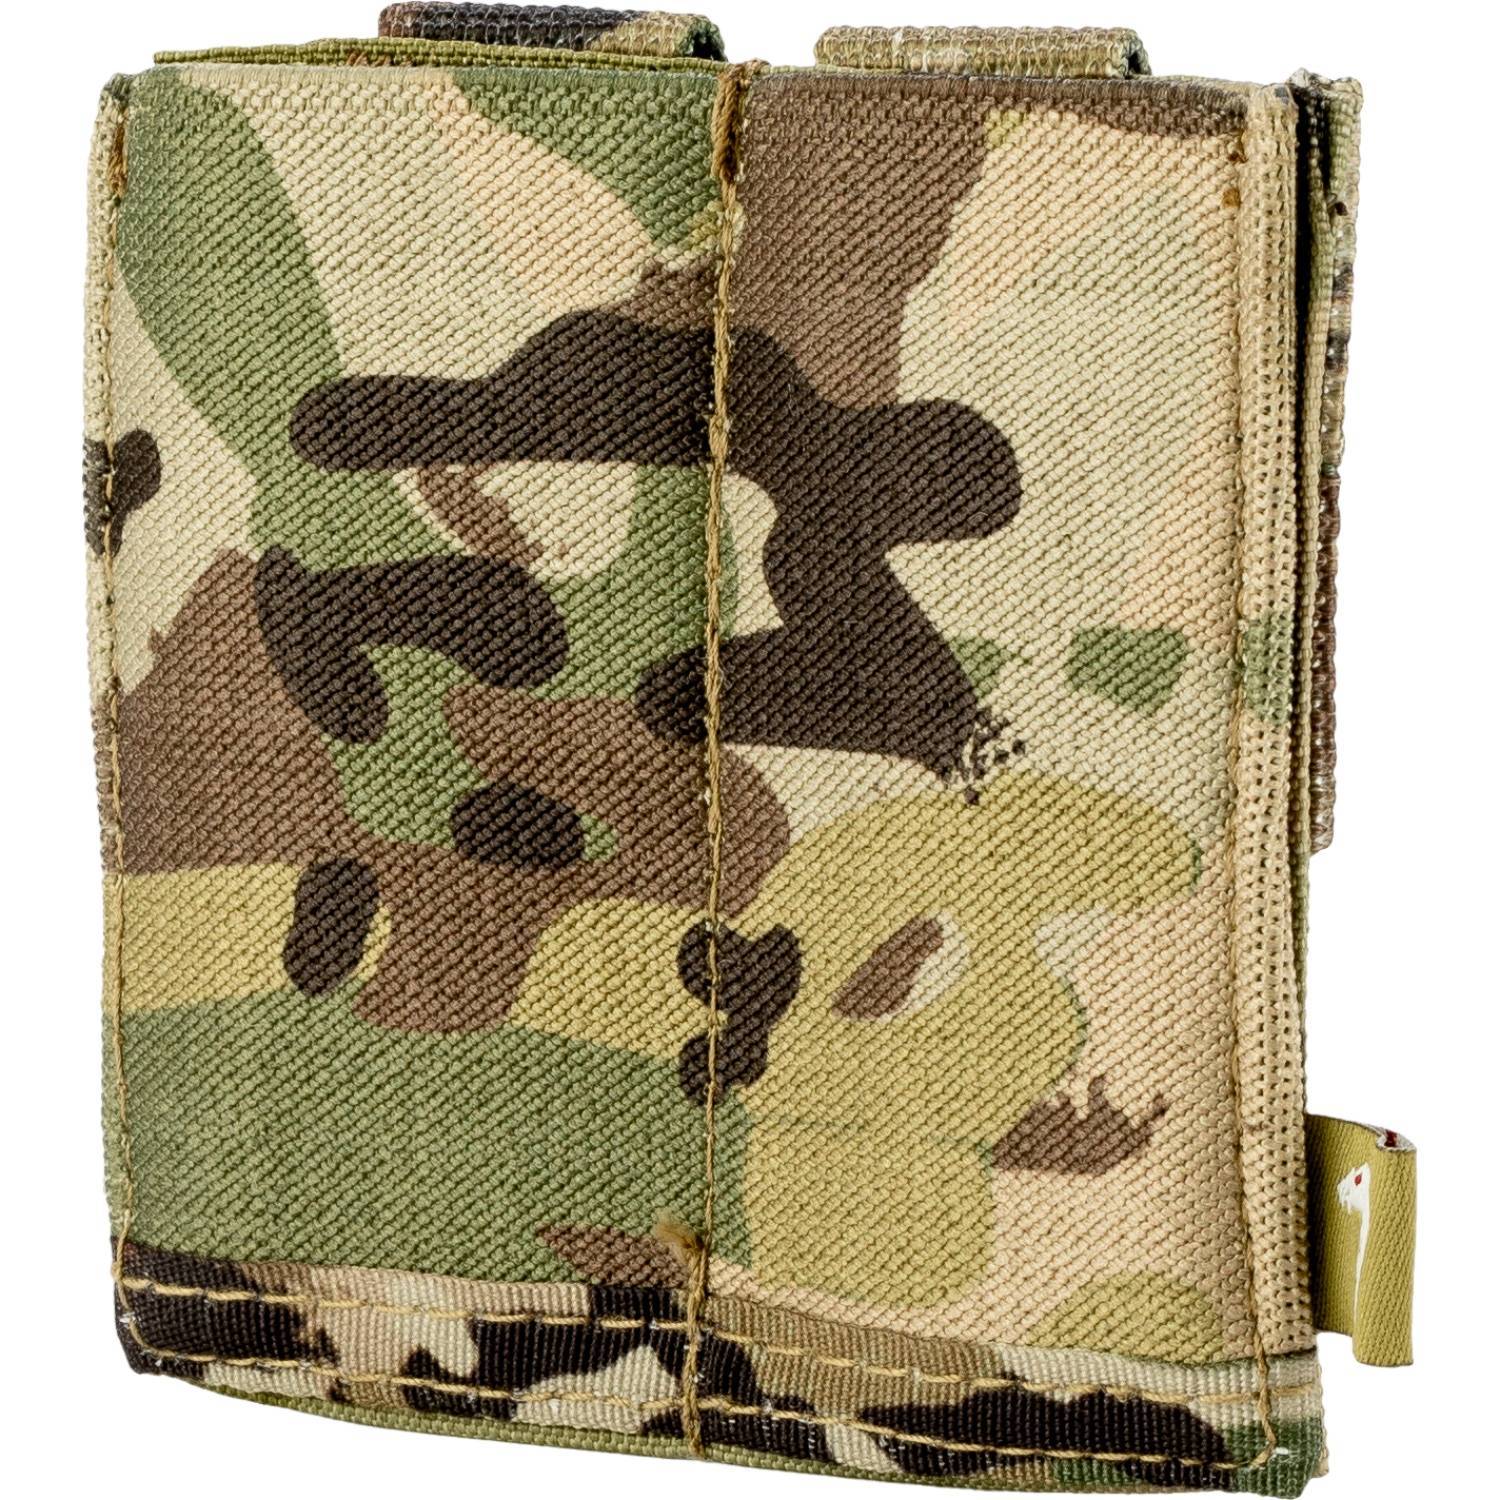 Viper Tactical Double Pistol Mag Pouch MOLLE Airsoft Military Modular Magazine 